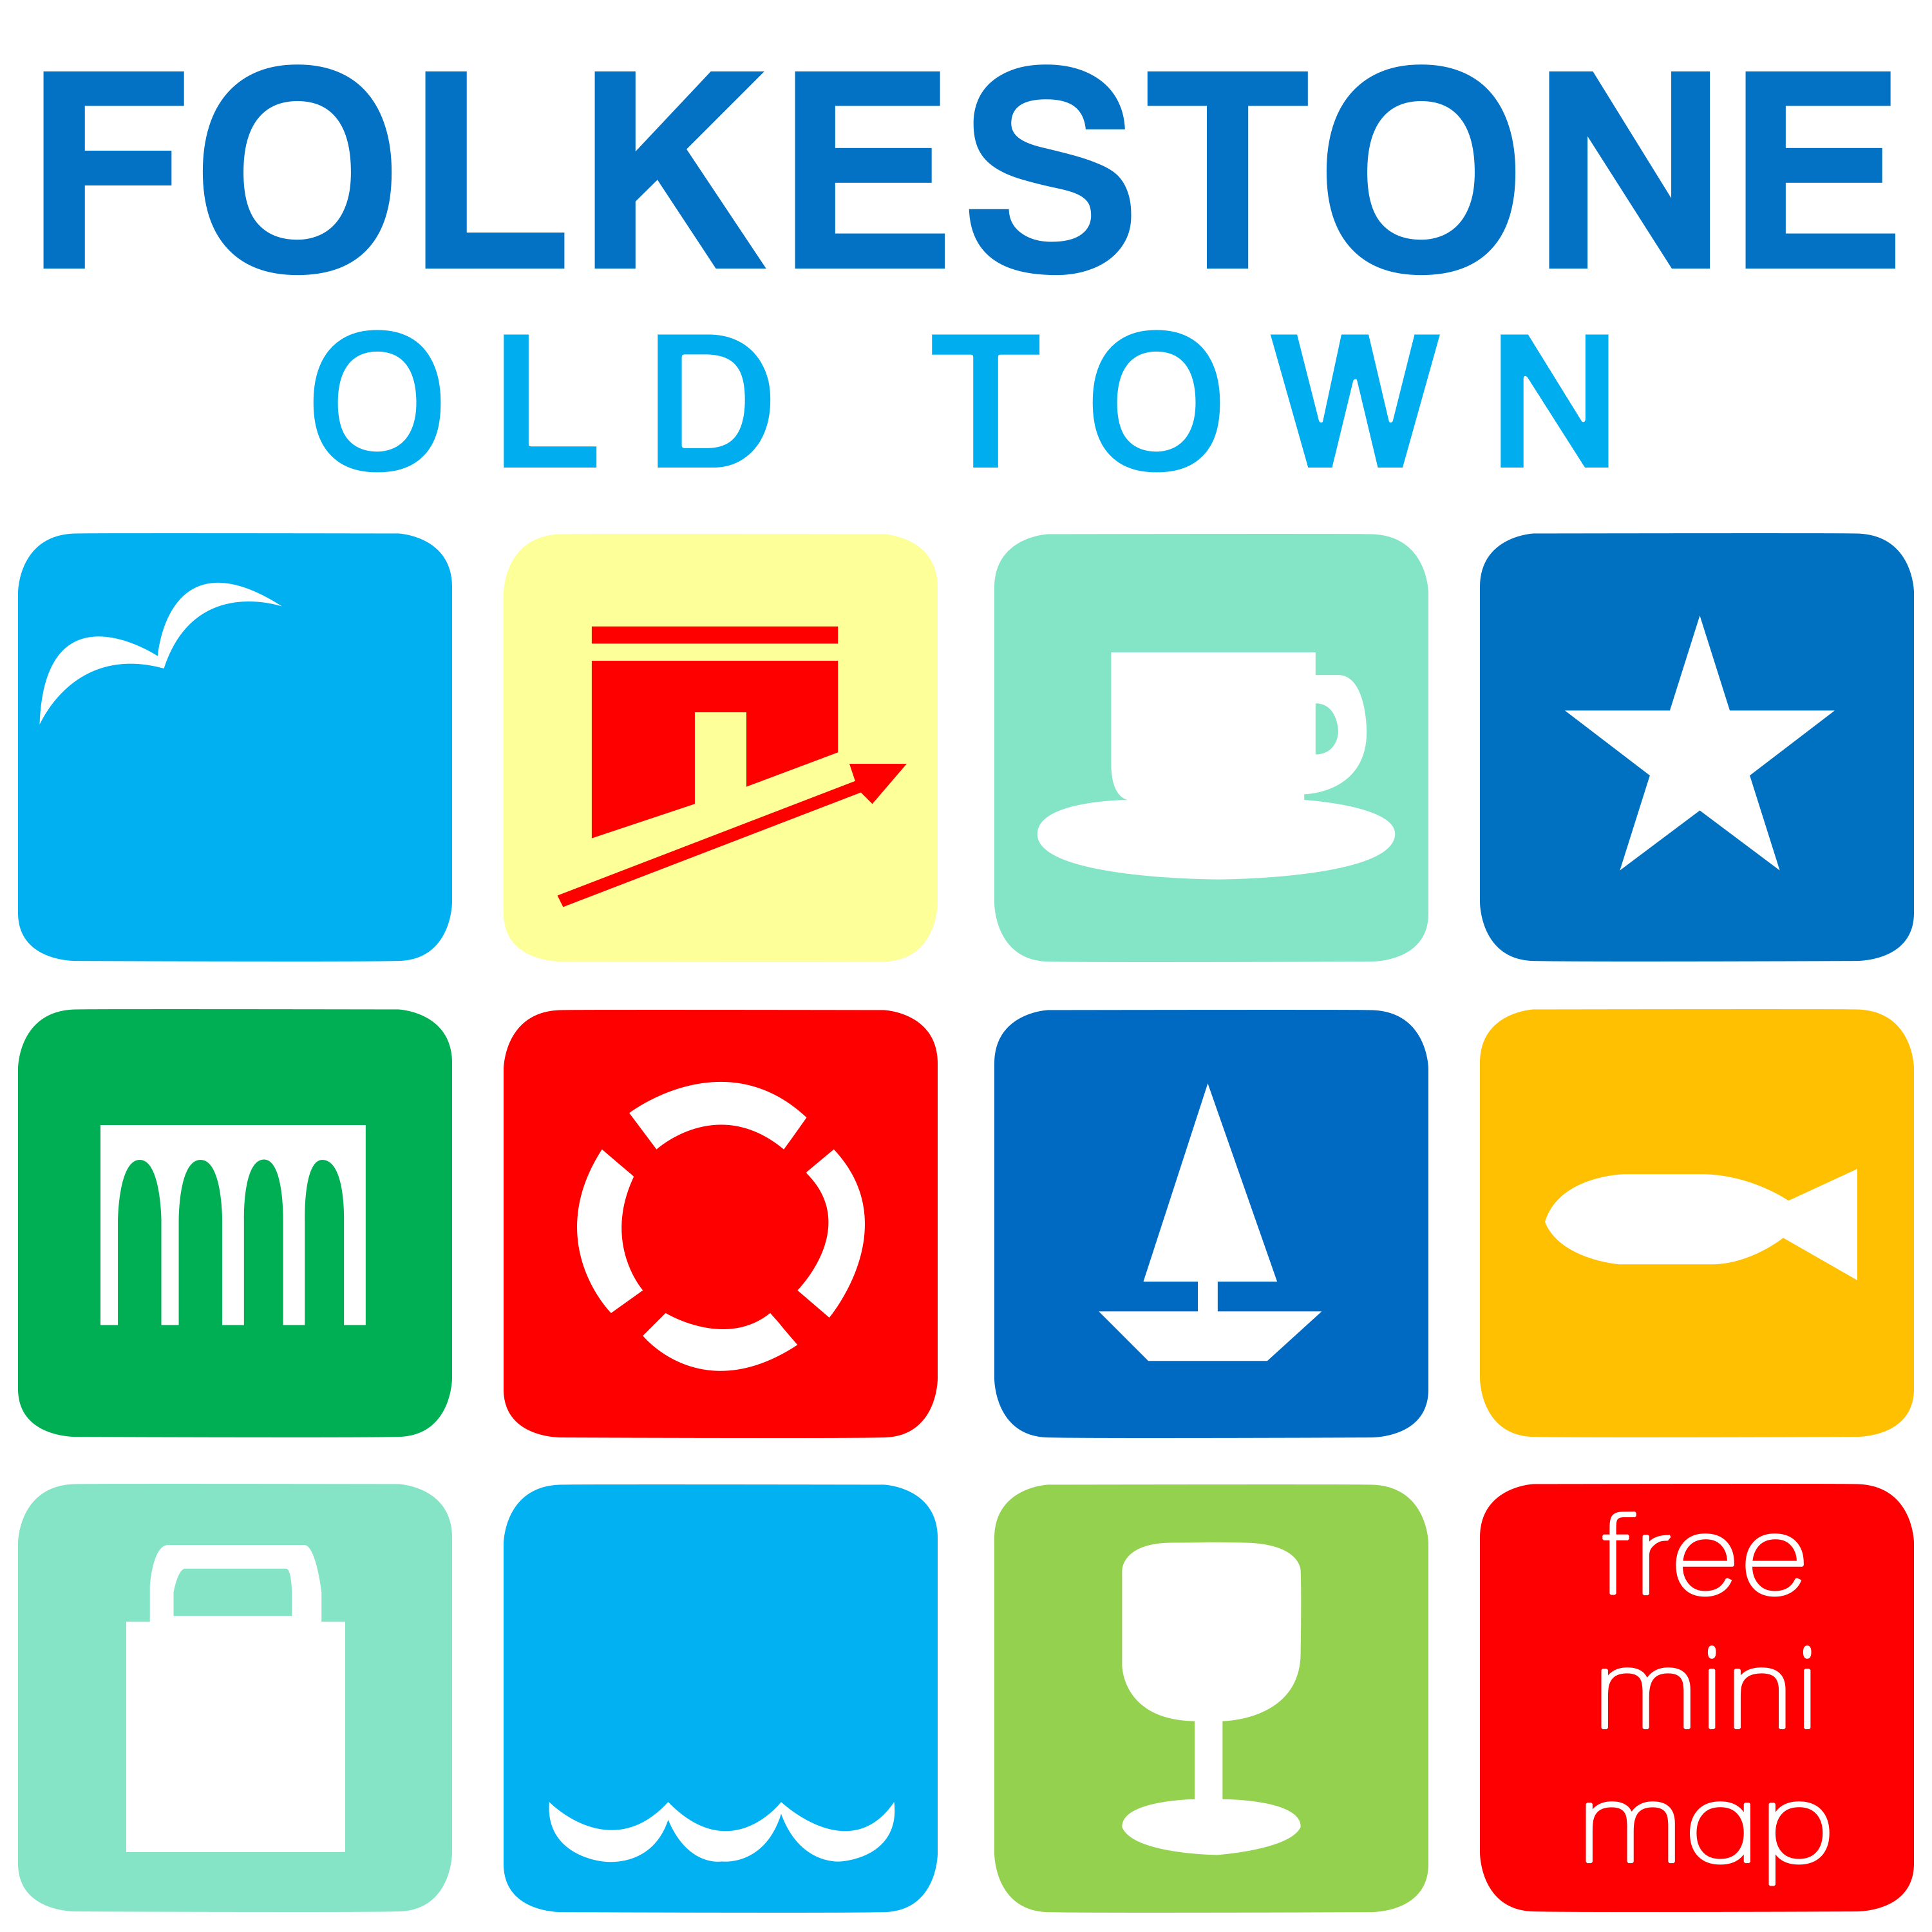 A selection of Cafes, Bars, Restaurants, Galleries & other local businesses based in Folkestones Historic Old Town &Harbour. Free local map printed twice a year